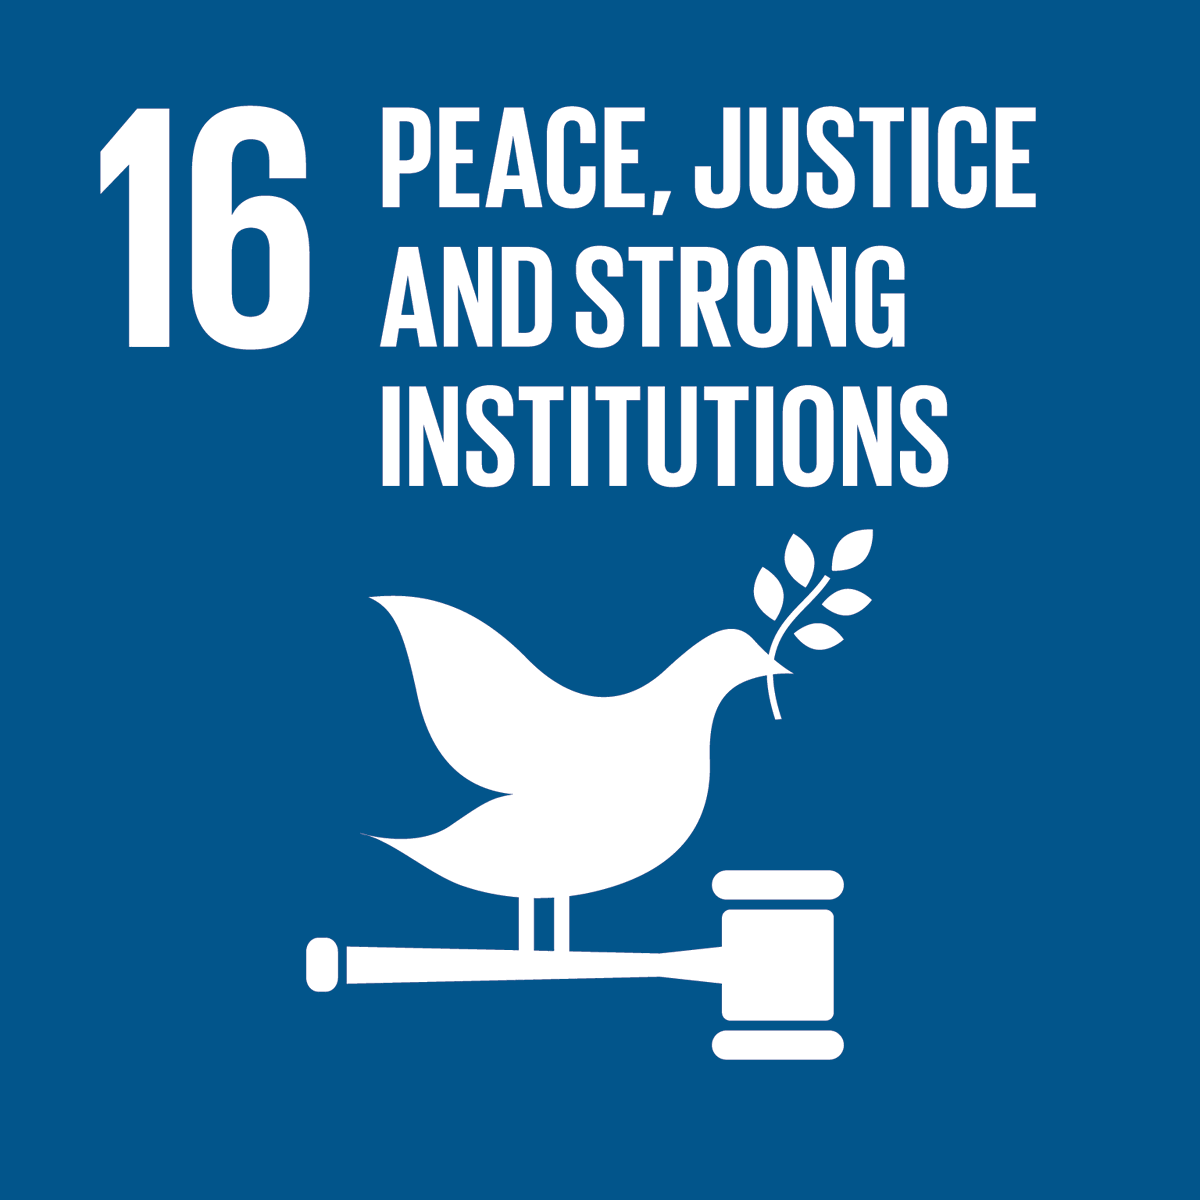 123) SDG #16: Provide peaceful and inclusive societies for sustainable development, provide access to justice for all, and build effective, accountable and inclusive institutions at all levels.